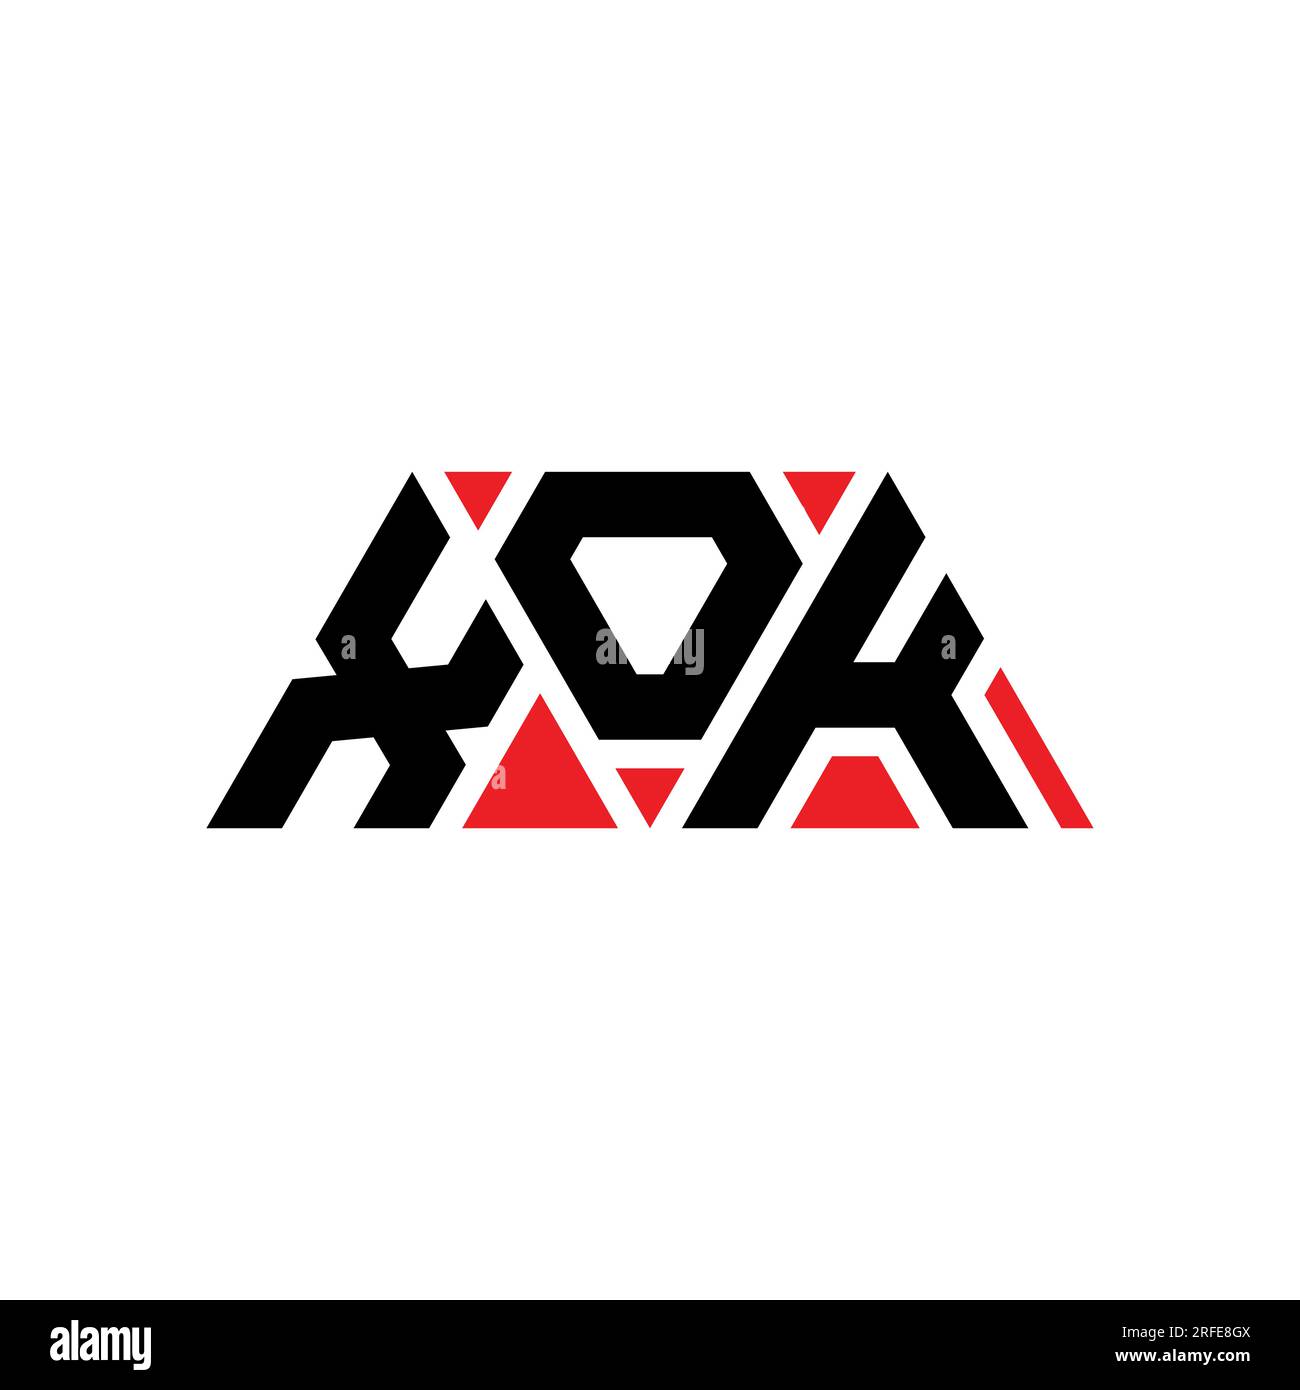 Xok logo design Cut Out Stock Images & Pictures - Alamy